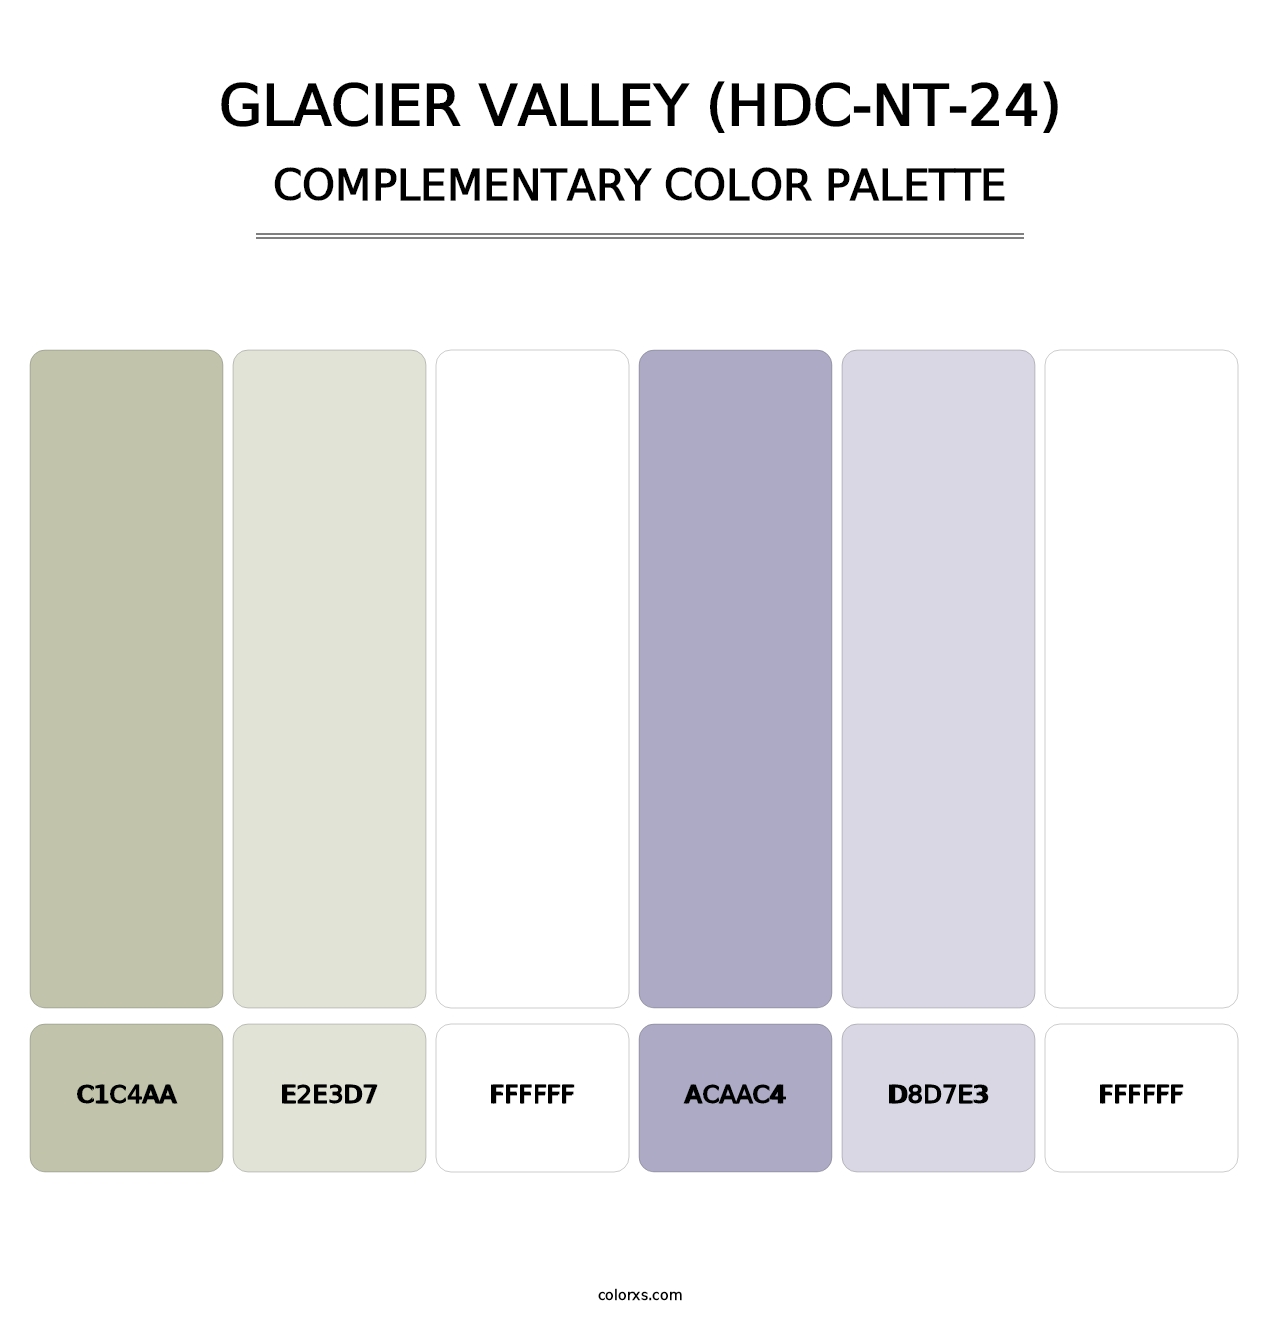 Glacier Valley (HDC-NT-24) - Complementary Color Palette